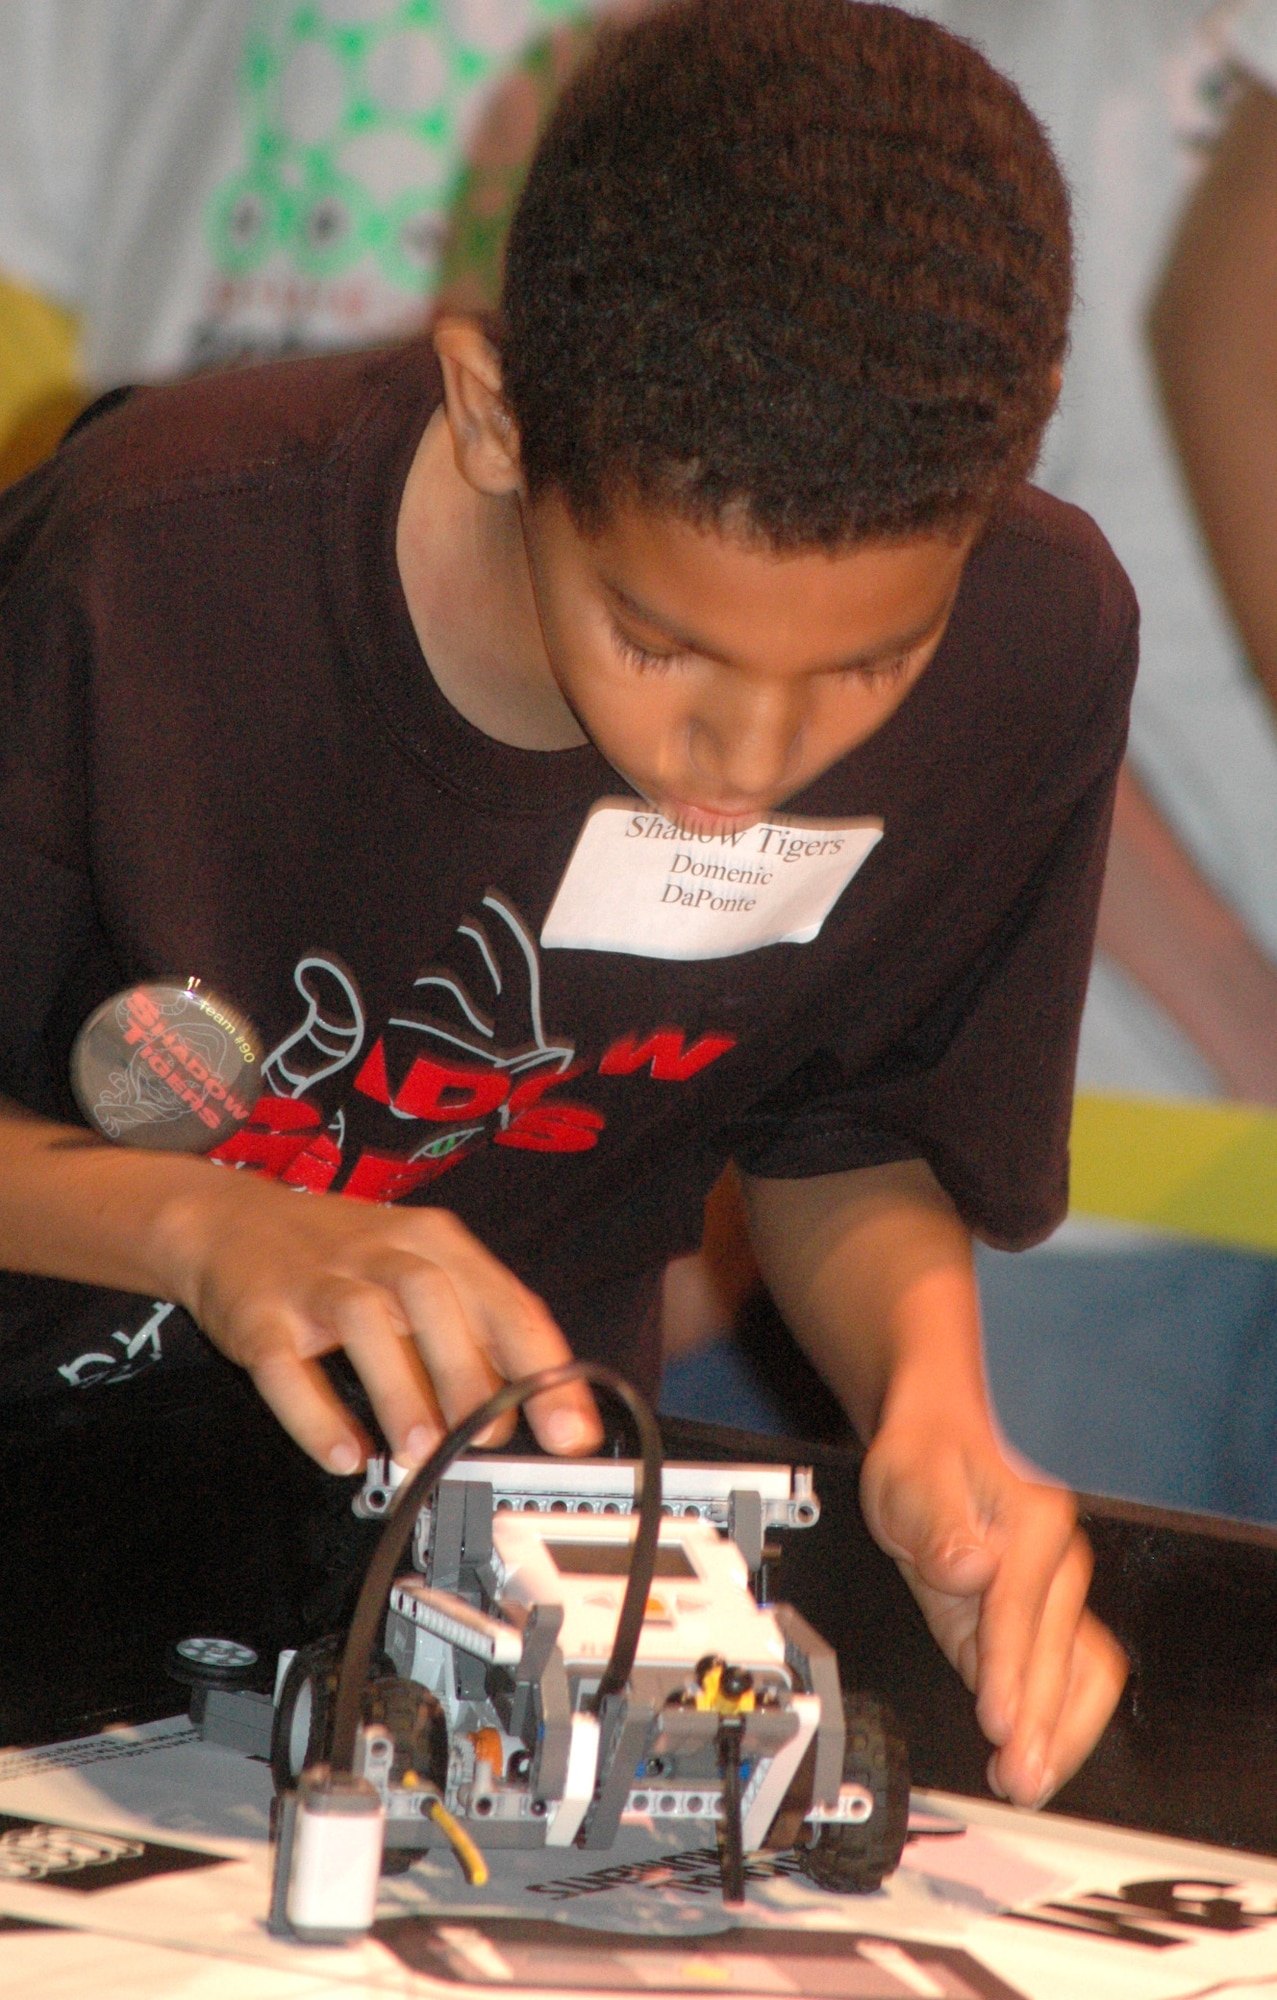 Domenic Daponte of the Shadow Tigers from Marietta resets his robot during first-round competition at the For Inspiration and Recognition of Science and Technology Regional Lego League Robotics competition.   U.S. Air Force photo by Sue Sapp.